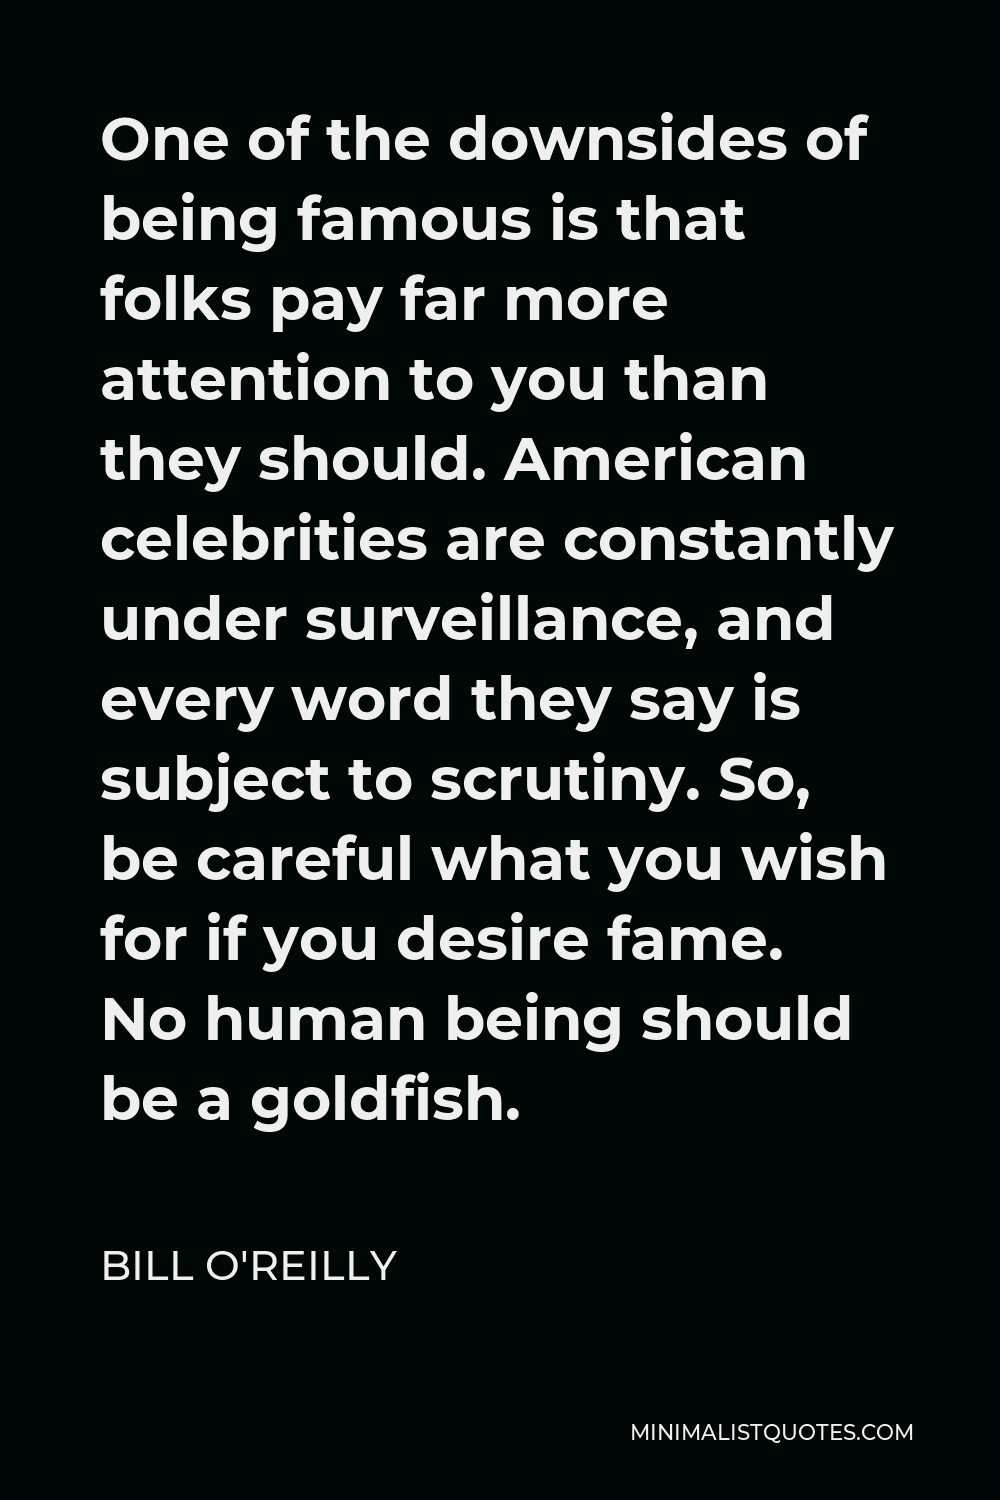 Bill O'Reilly Quote - One of the downsides of being famous is that folks pay far more attention to you than they should. American celebrities are constantly under surveillance, and every word they say is subject to scrutiny. So, be careful what you wish for if you desire fame. No human being should be a goldfish.